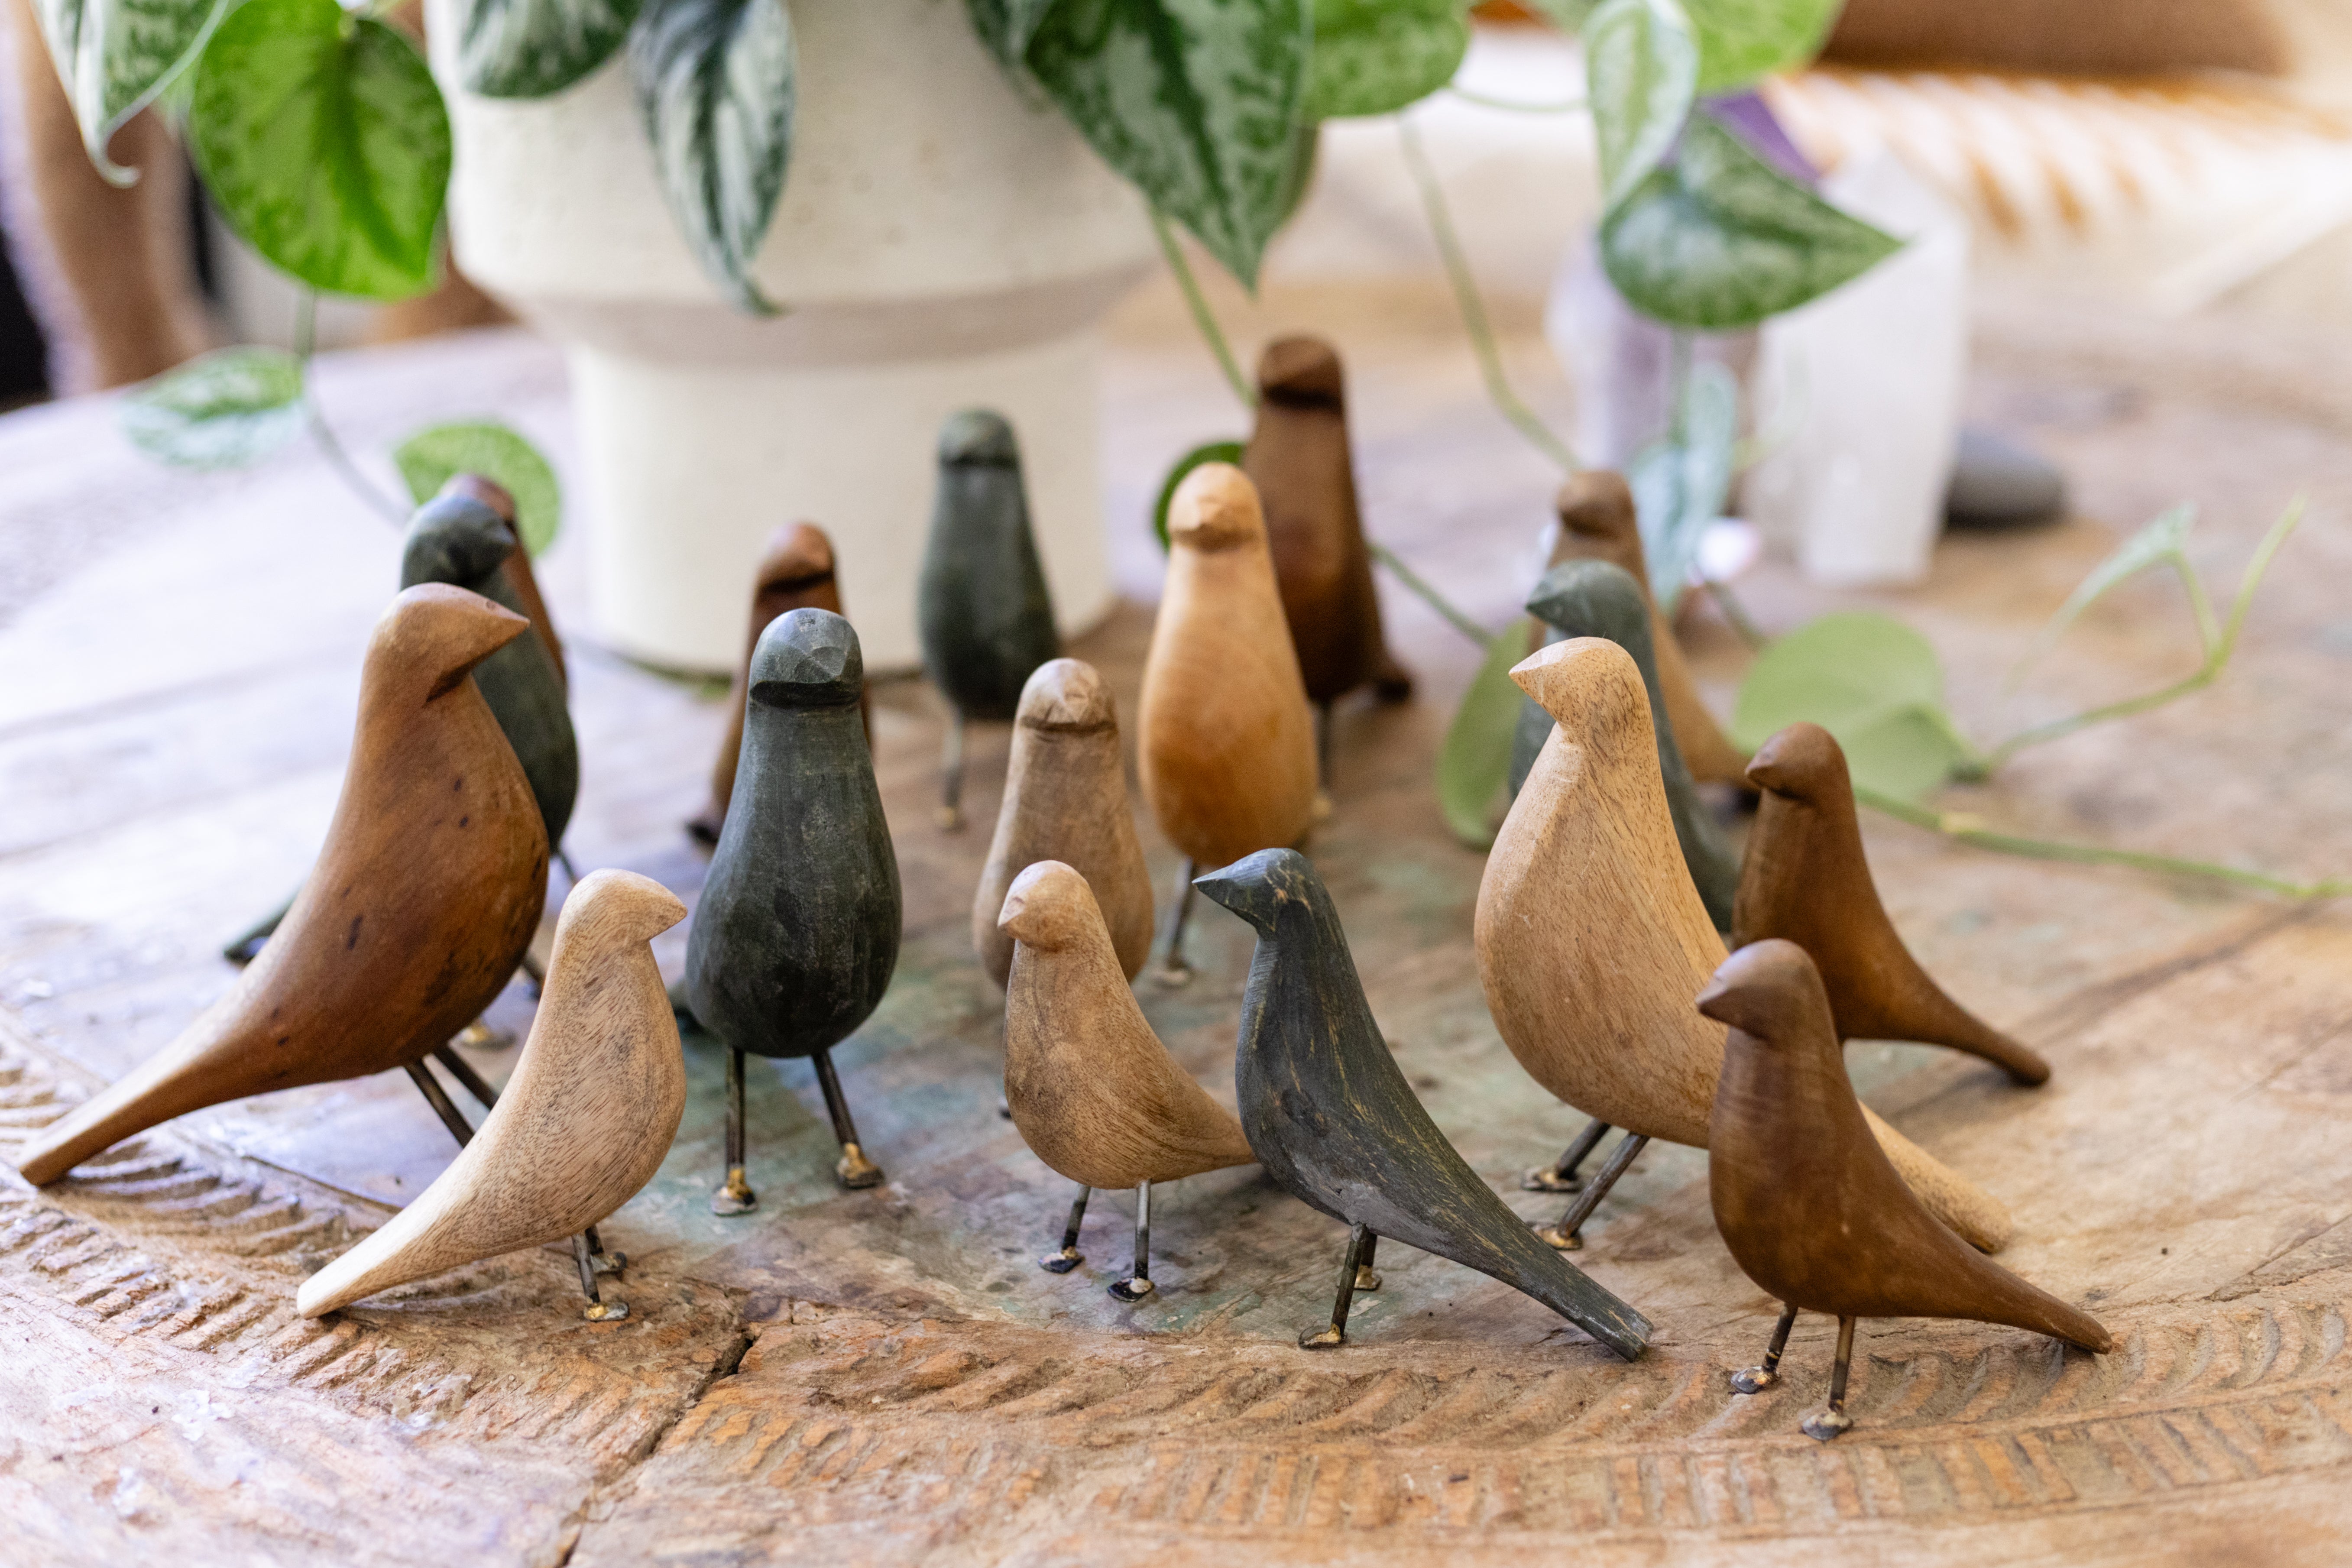 Birds of a feather flock together in heirloom glassware set